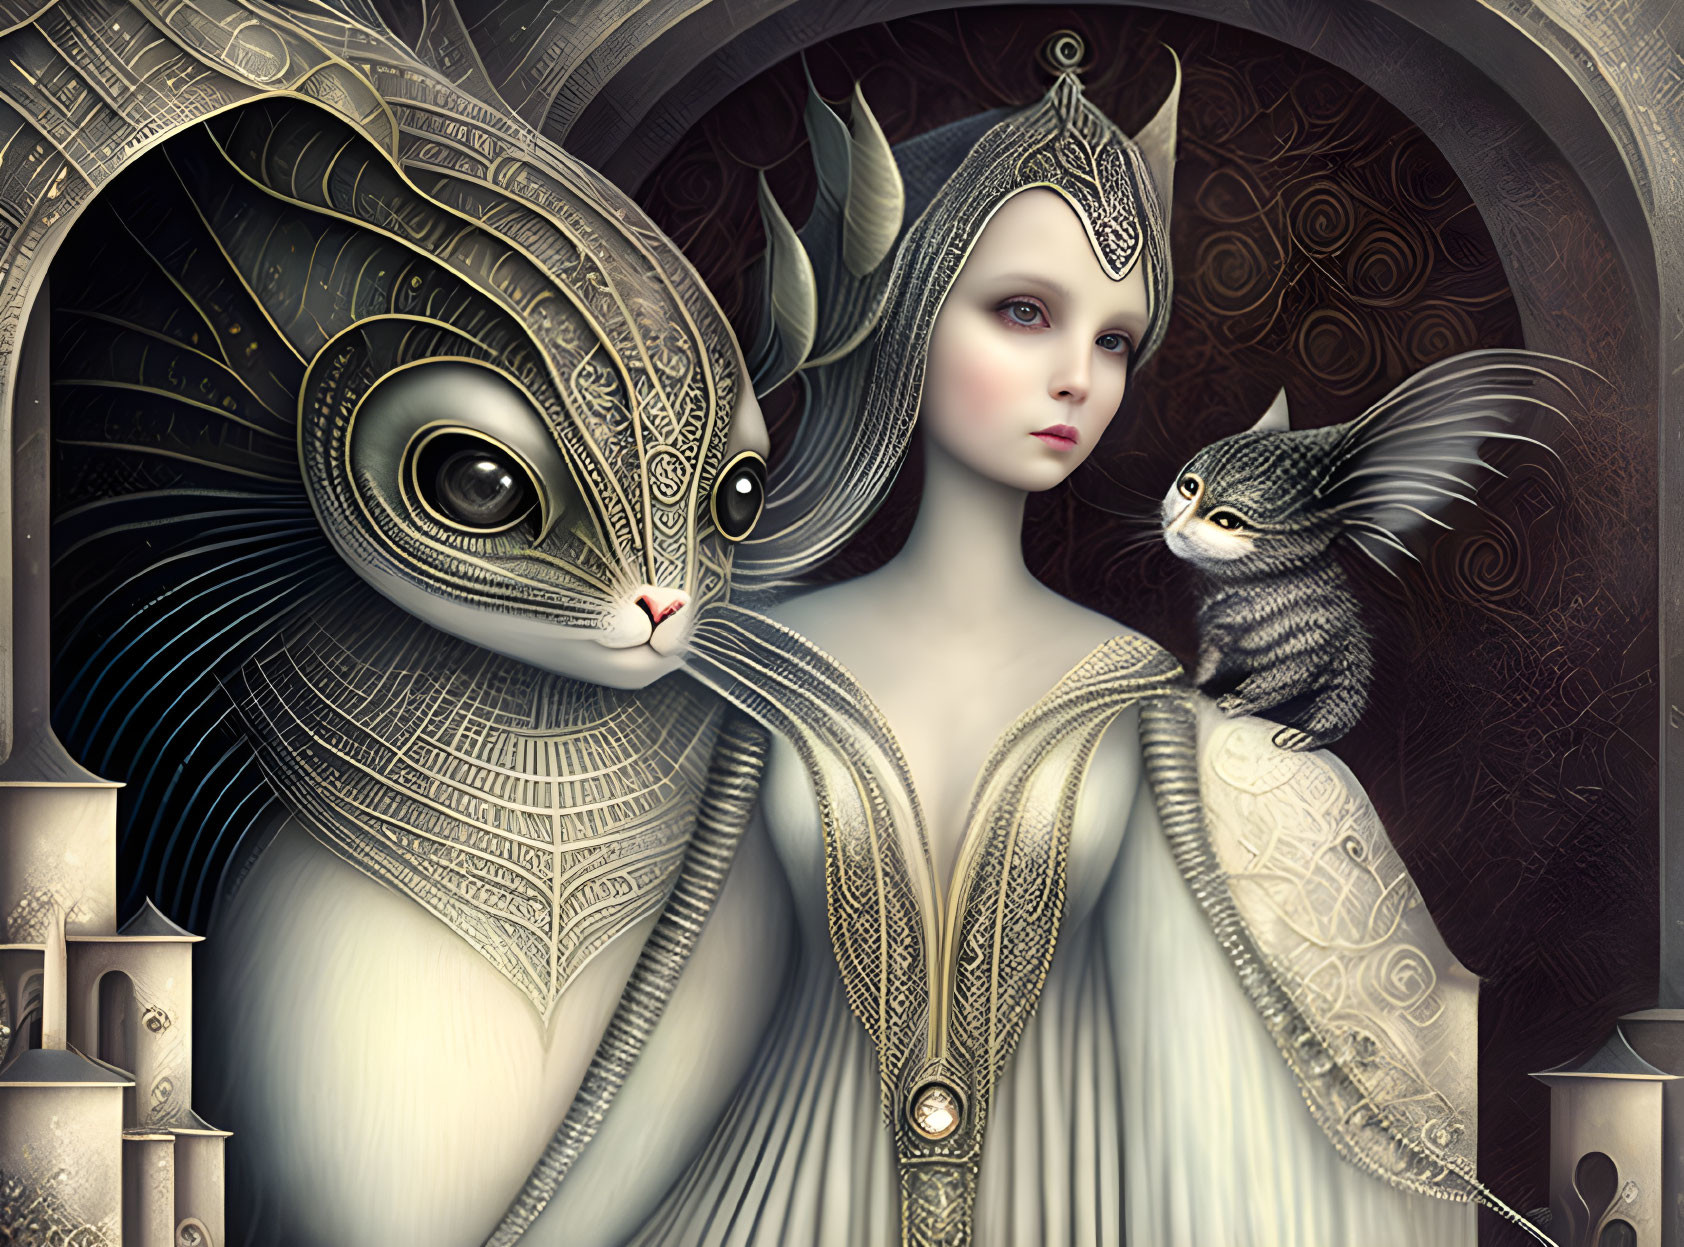 Surrealist illustration of regal woman with large and small cats in ornate fantasy setting